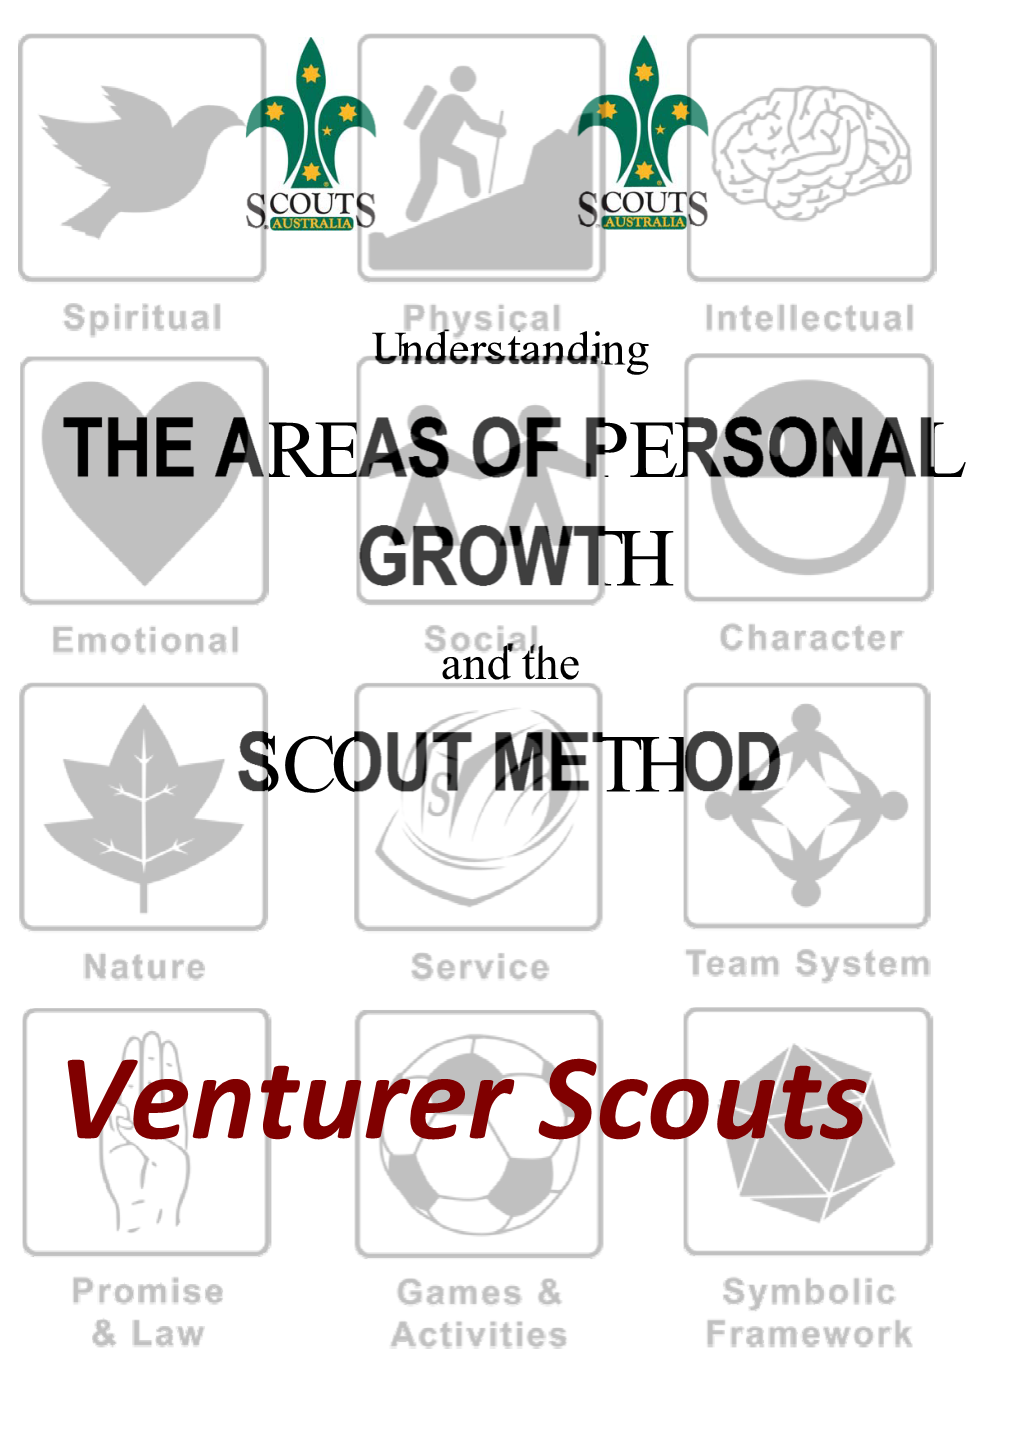 The Areas of Personal Growth Scout Method